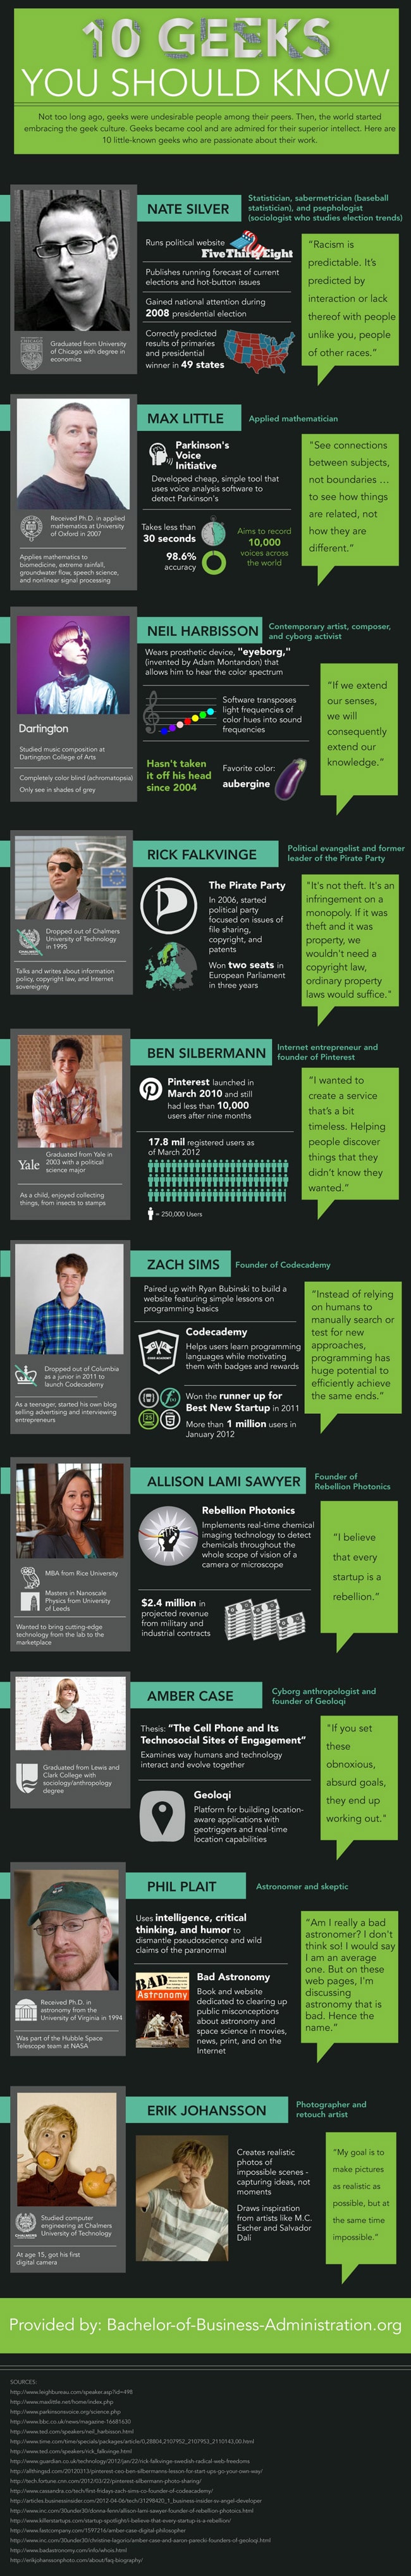 10-geeks-famous-unknown-infographic